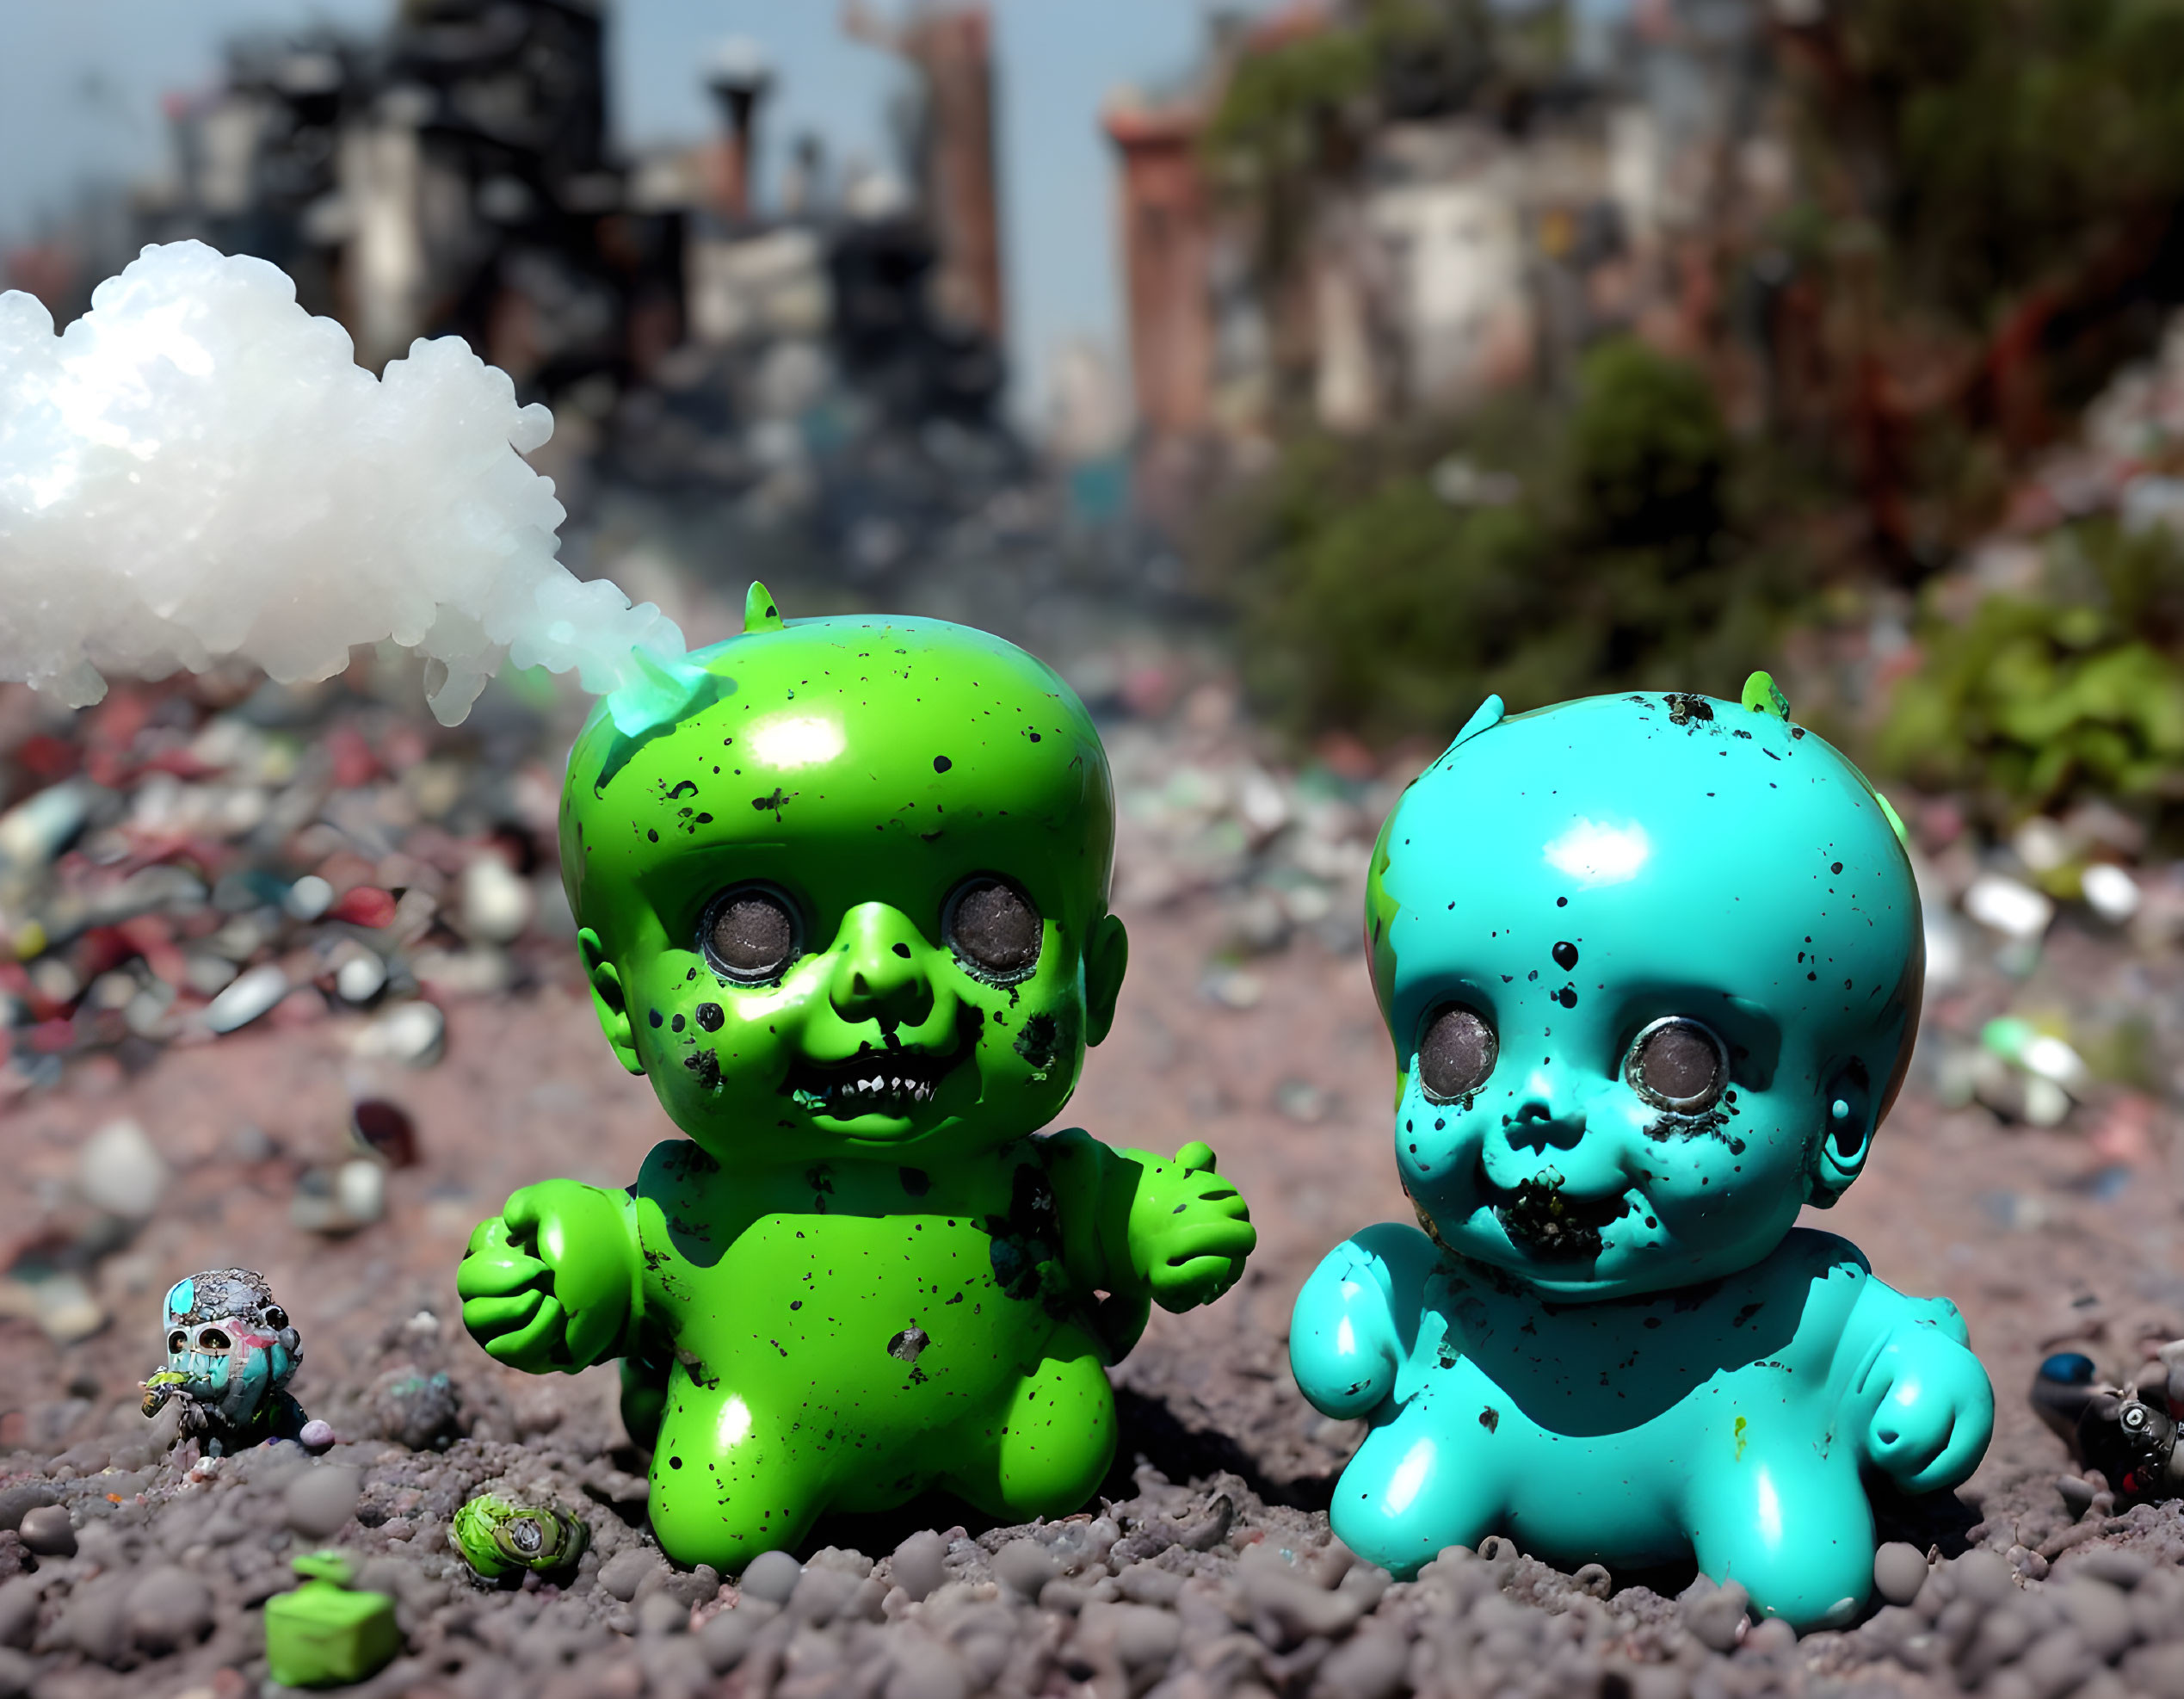 Zombie-themed toy figures with smoke in apocalyptic miniature scene